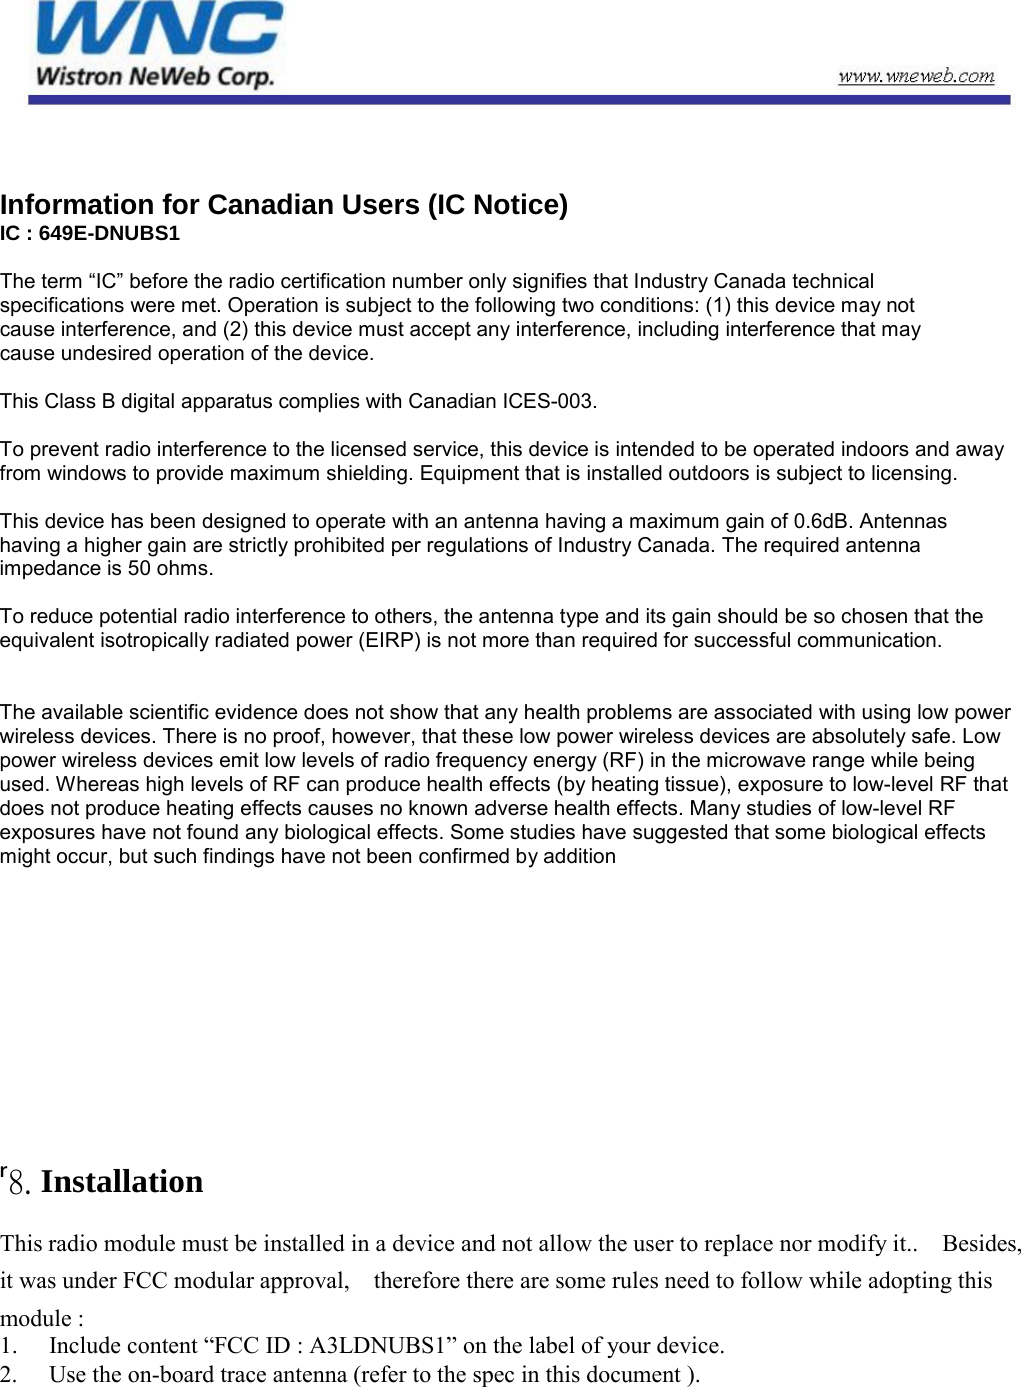   Information for Canadian Users (IC Notice) IC : 649E-DNUBS1  The term “IC” before the radio certification number only signifies that Industry Canada technical specifications were met. Operation is subject to the following two conditions: (1) this device may not cause interference, and (2) this device must accept any interference, including interference that may cause undesired operation of the device.  This Class B digital apparatus complies with Canadian ICES-003. To prevent radio interference to the licensed service, this device is intended to be operated indoors and away from windows to provide maximum shielding. Equipment that is installed outdoors is subject to licensing.  This device has been designed to operate with an antenna having a maximum gain of 0.6dB. Antennas having a higher gain are strictly prohibited per regulations of Industry Canada. The required antenna impedance is 50 ohms.    To reduce potential radio interference to others, the antenna type and its gain should be so chosen that the equivalent isotropically radiated power (EIRP) is not more than required for successful communication.    The available scientific evidence does not show that any health problems are associated with using low power wireless devices. There is no proof, however, that these low power wireless devices are absolutely safe. Low power wireless devices emit low levels of radio frequency energy (RF) in the microwave range while being used. Whereas high levels of RF can produce health effects (by heating tissue), exposure to low-level RF that does not produce heating effects causes no known adverse health effects. Many studies of low-level RF exposures have not found any biological effects. Some studies have suggested that some biological effects might occur, but such findings have not been confirmed by addition     ʳ8. Installation   This radio module must be installed in a device and not allow the user to replace nor modify it..    Besides, it was under FCC modular approval,    therefore there are some rules need to follow while adopting this module :   1.   Include content “FCC ID : A3LDNUBS1” on the label of your device.   2.   Use the on-board trace antenna (refer to the spec in this document ).            